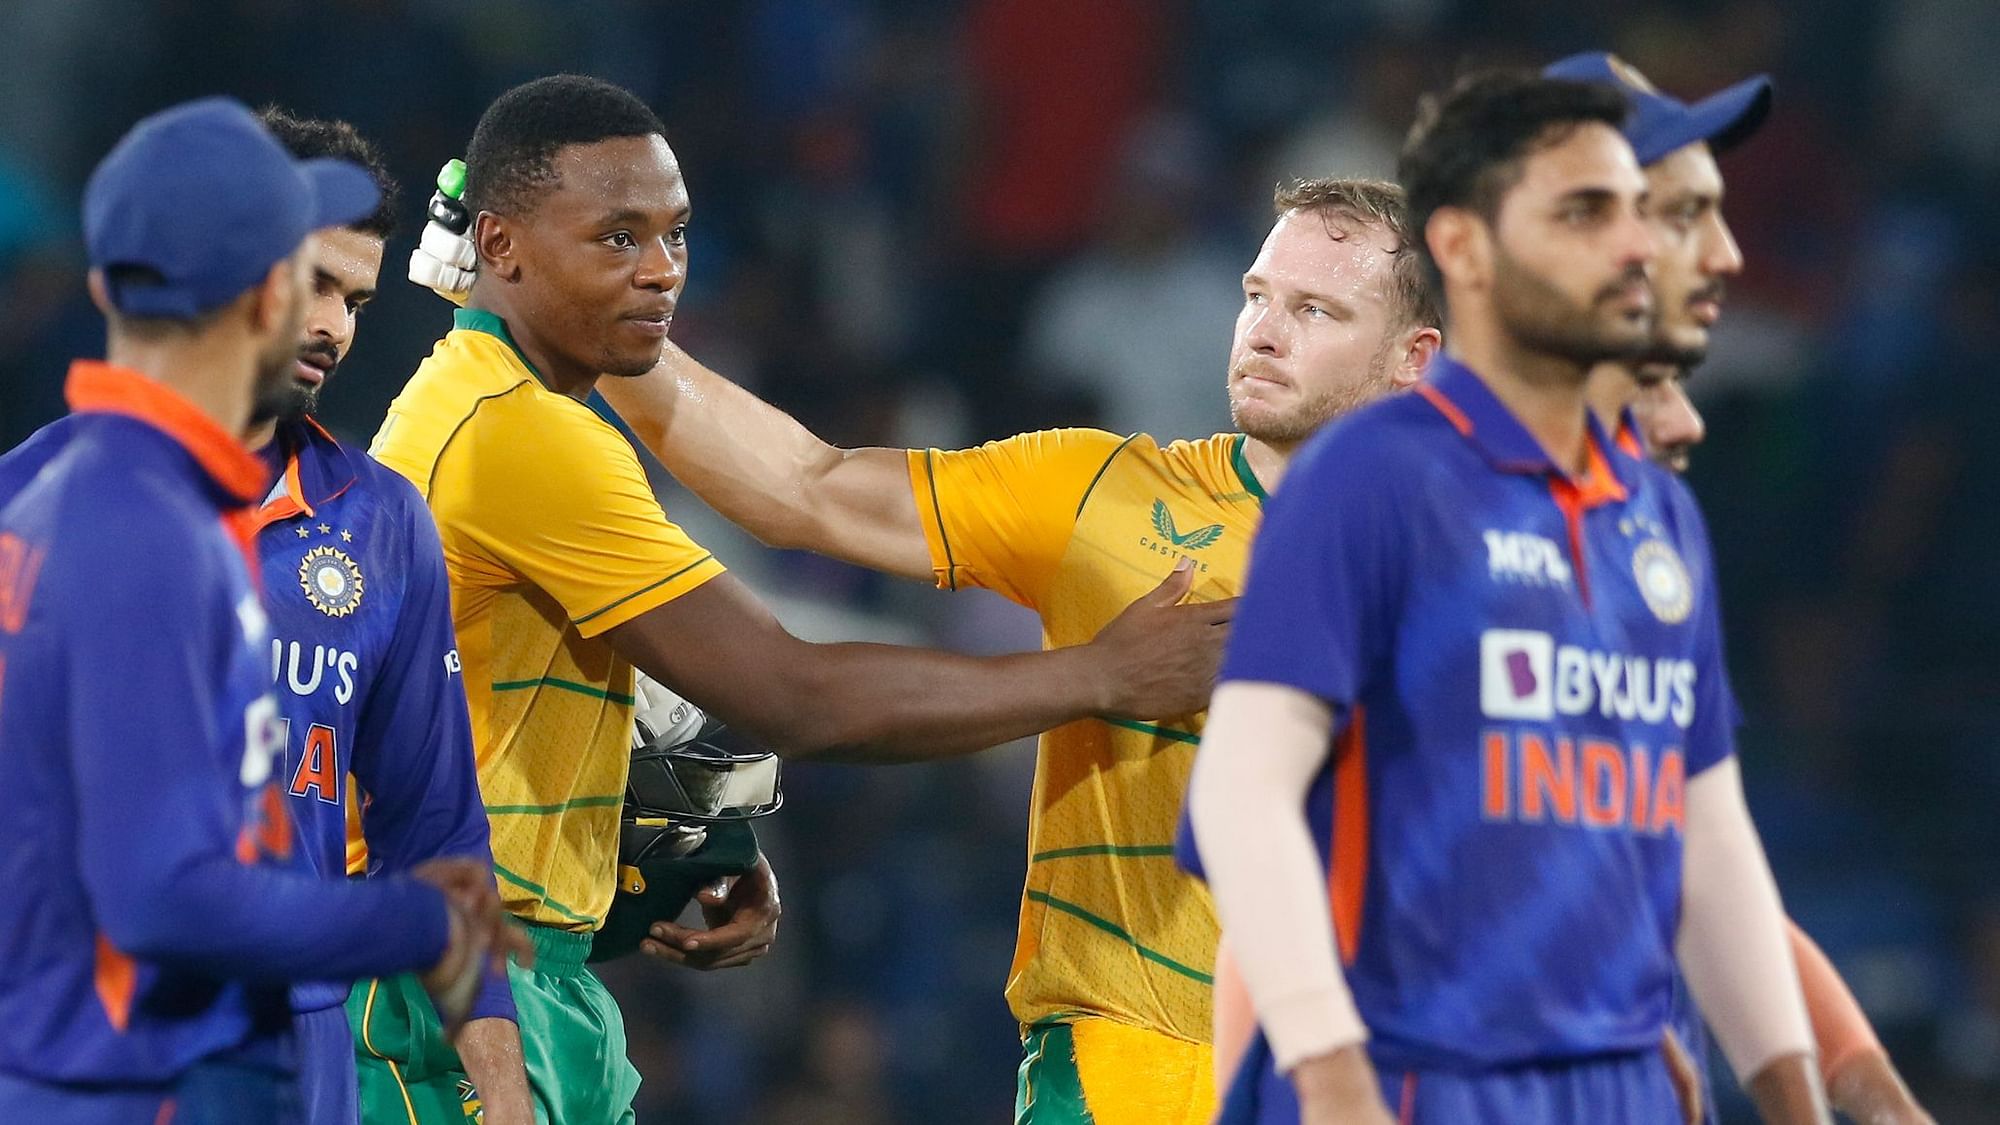 <div class="paragraphs"><p>South Africa beat India by 4 wickets in the second T20I at Cuttack.</p></div>